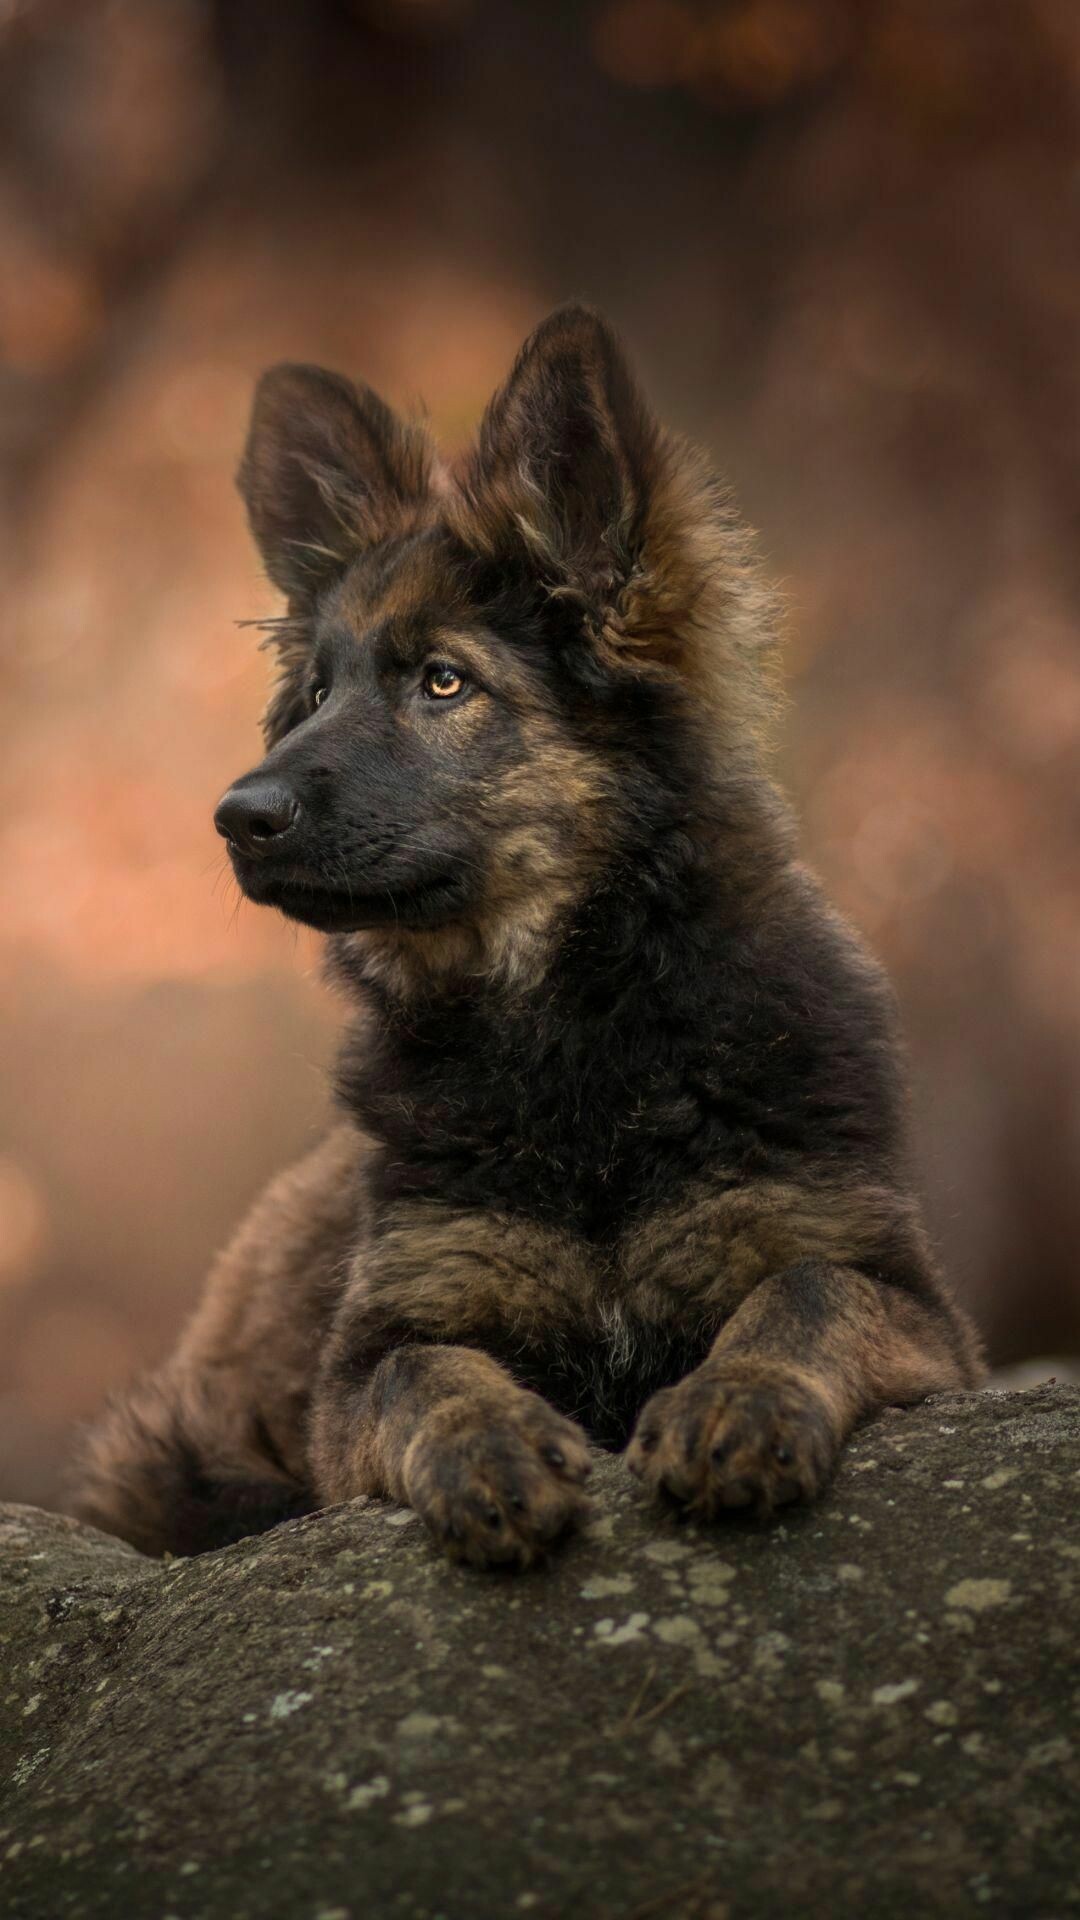 German Shepherd: Puppies, The second-most registered breed by the American Kennel Club. 1080x1920 Full HD Wallpaper.